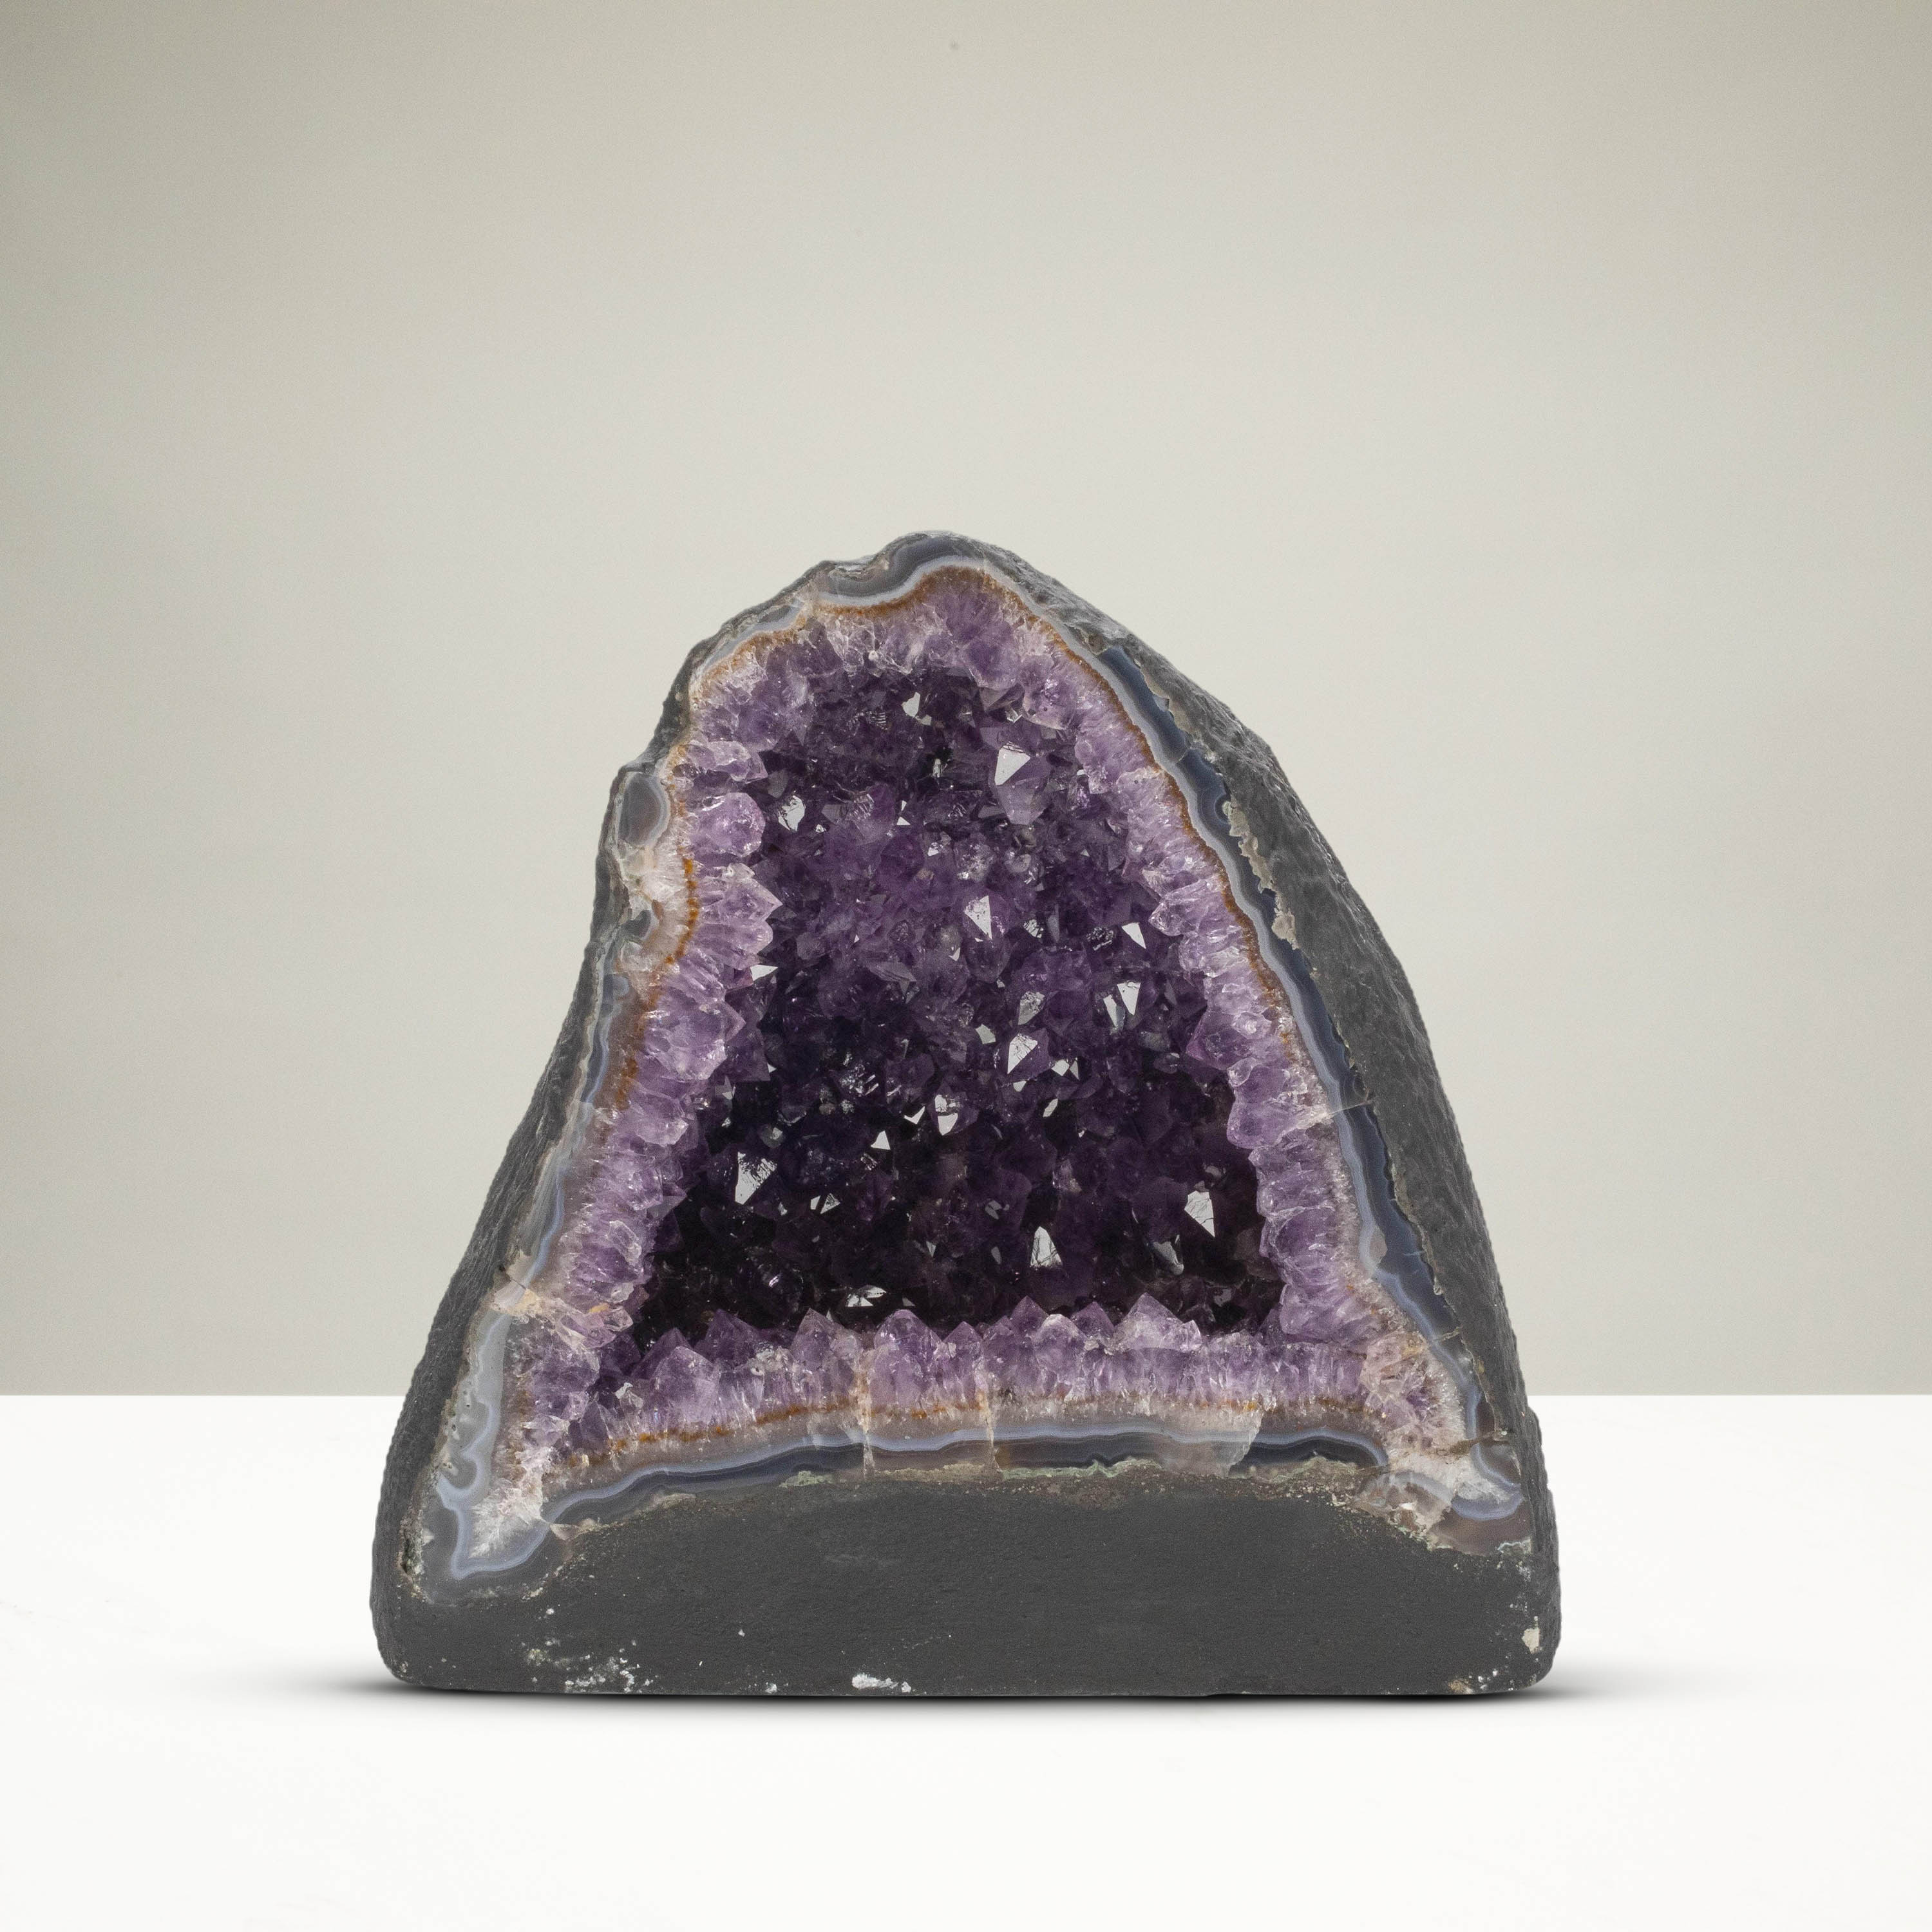 Kalifano Amethyst Amethyst Geode Cathedral - 12" / 44 lbs BAG6400.003